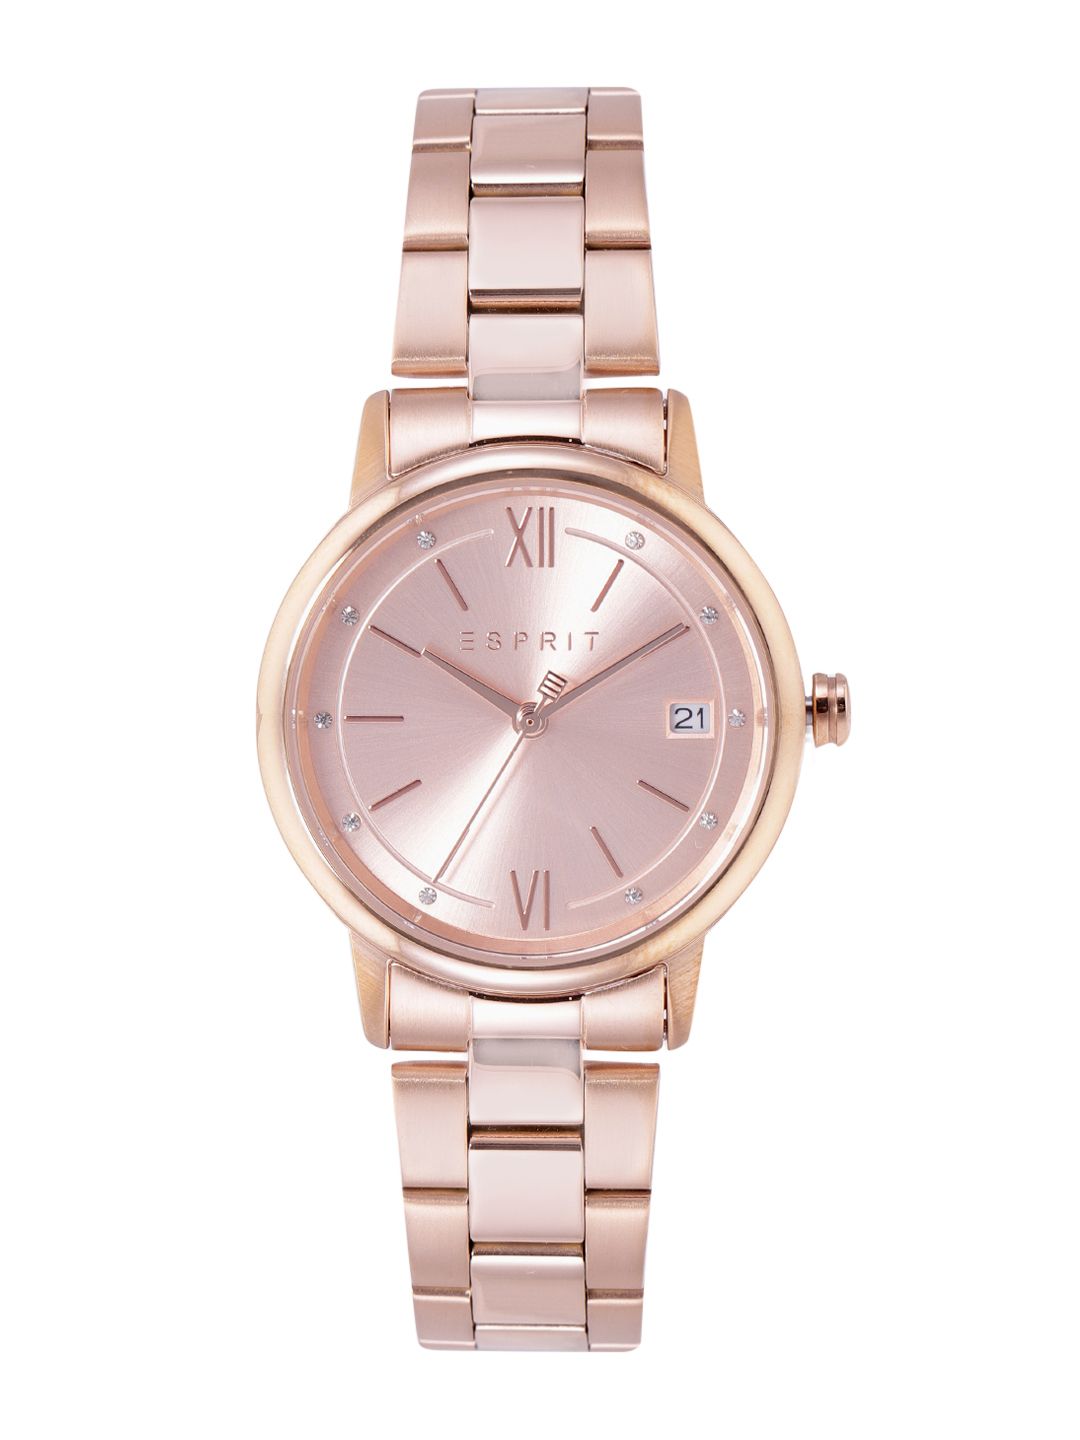 ESPRIT Women Rose Gold-Toned Dial & Bracelet Style Straps Analogue Watch ES1L181M0105 Price in India